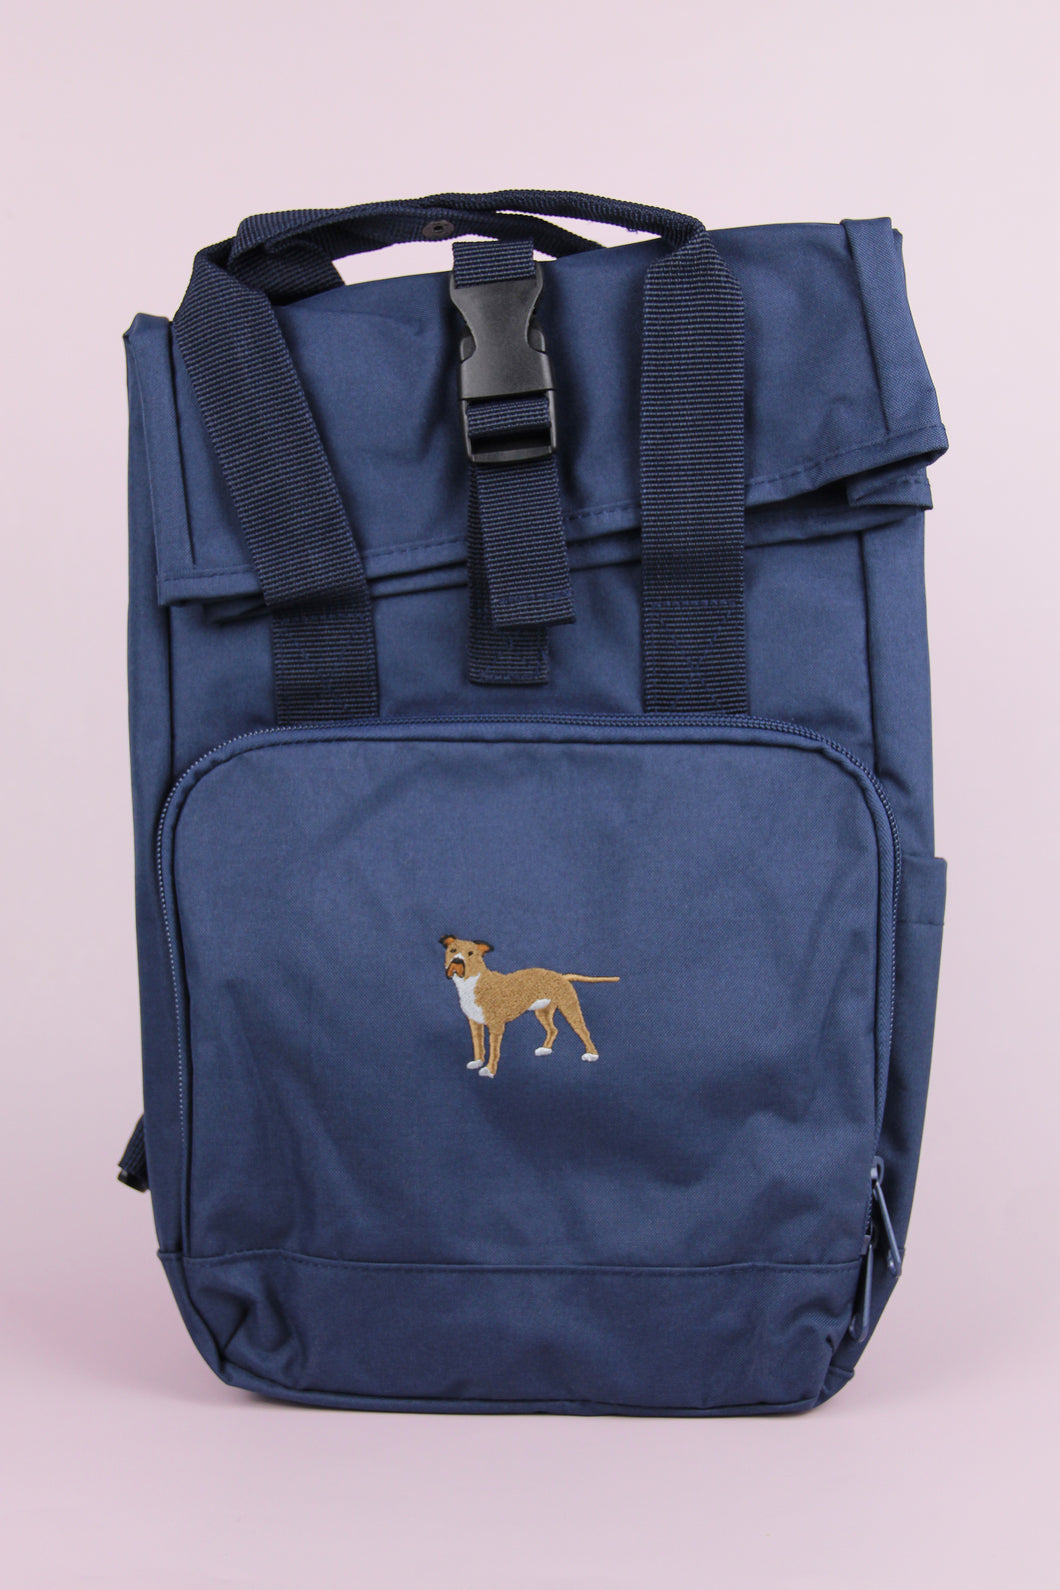 Staffie Recycled Backpack - Navy